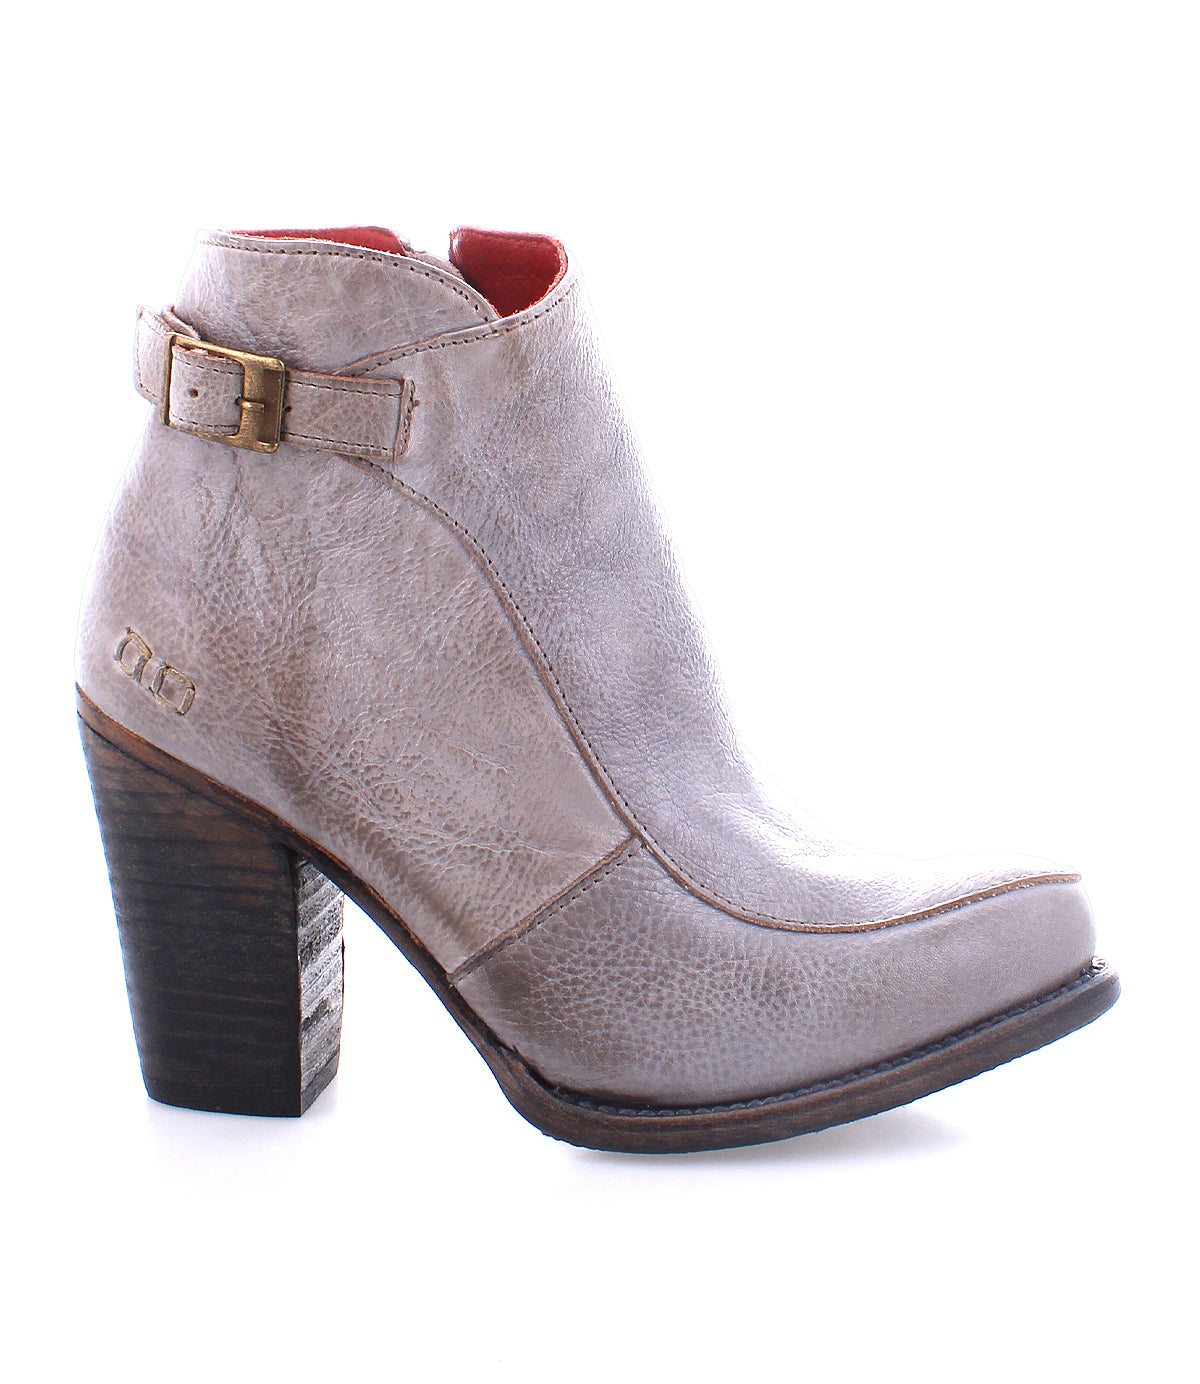 Isla Grey leather heeled bootie with vintage buckle accent and block heel by Bed Stu.